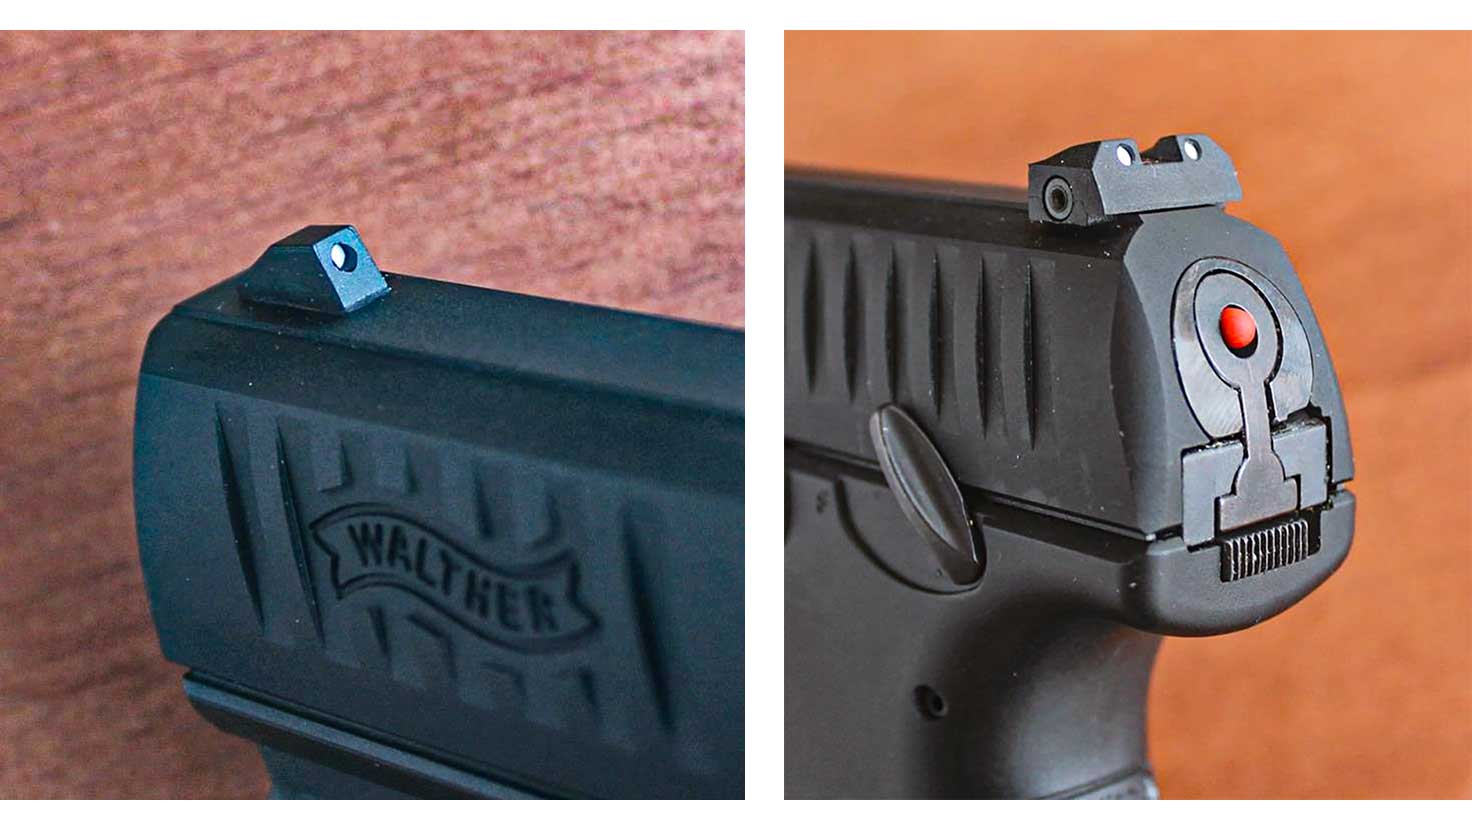 Walther CCP M2 .380 Pistol: Full Review - Guns and Ammo